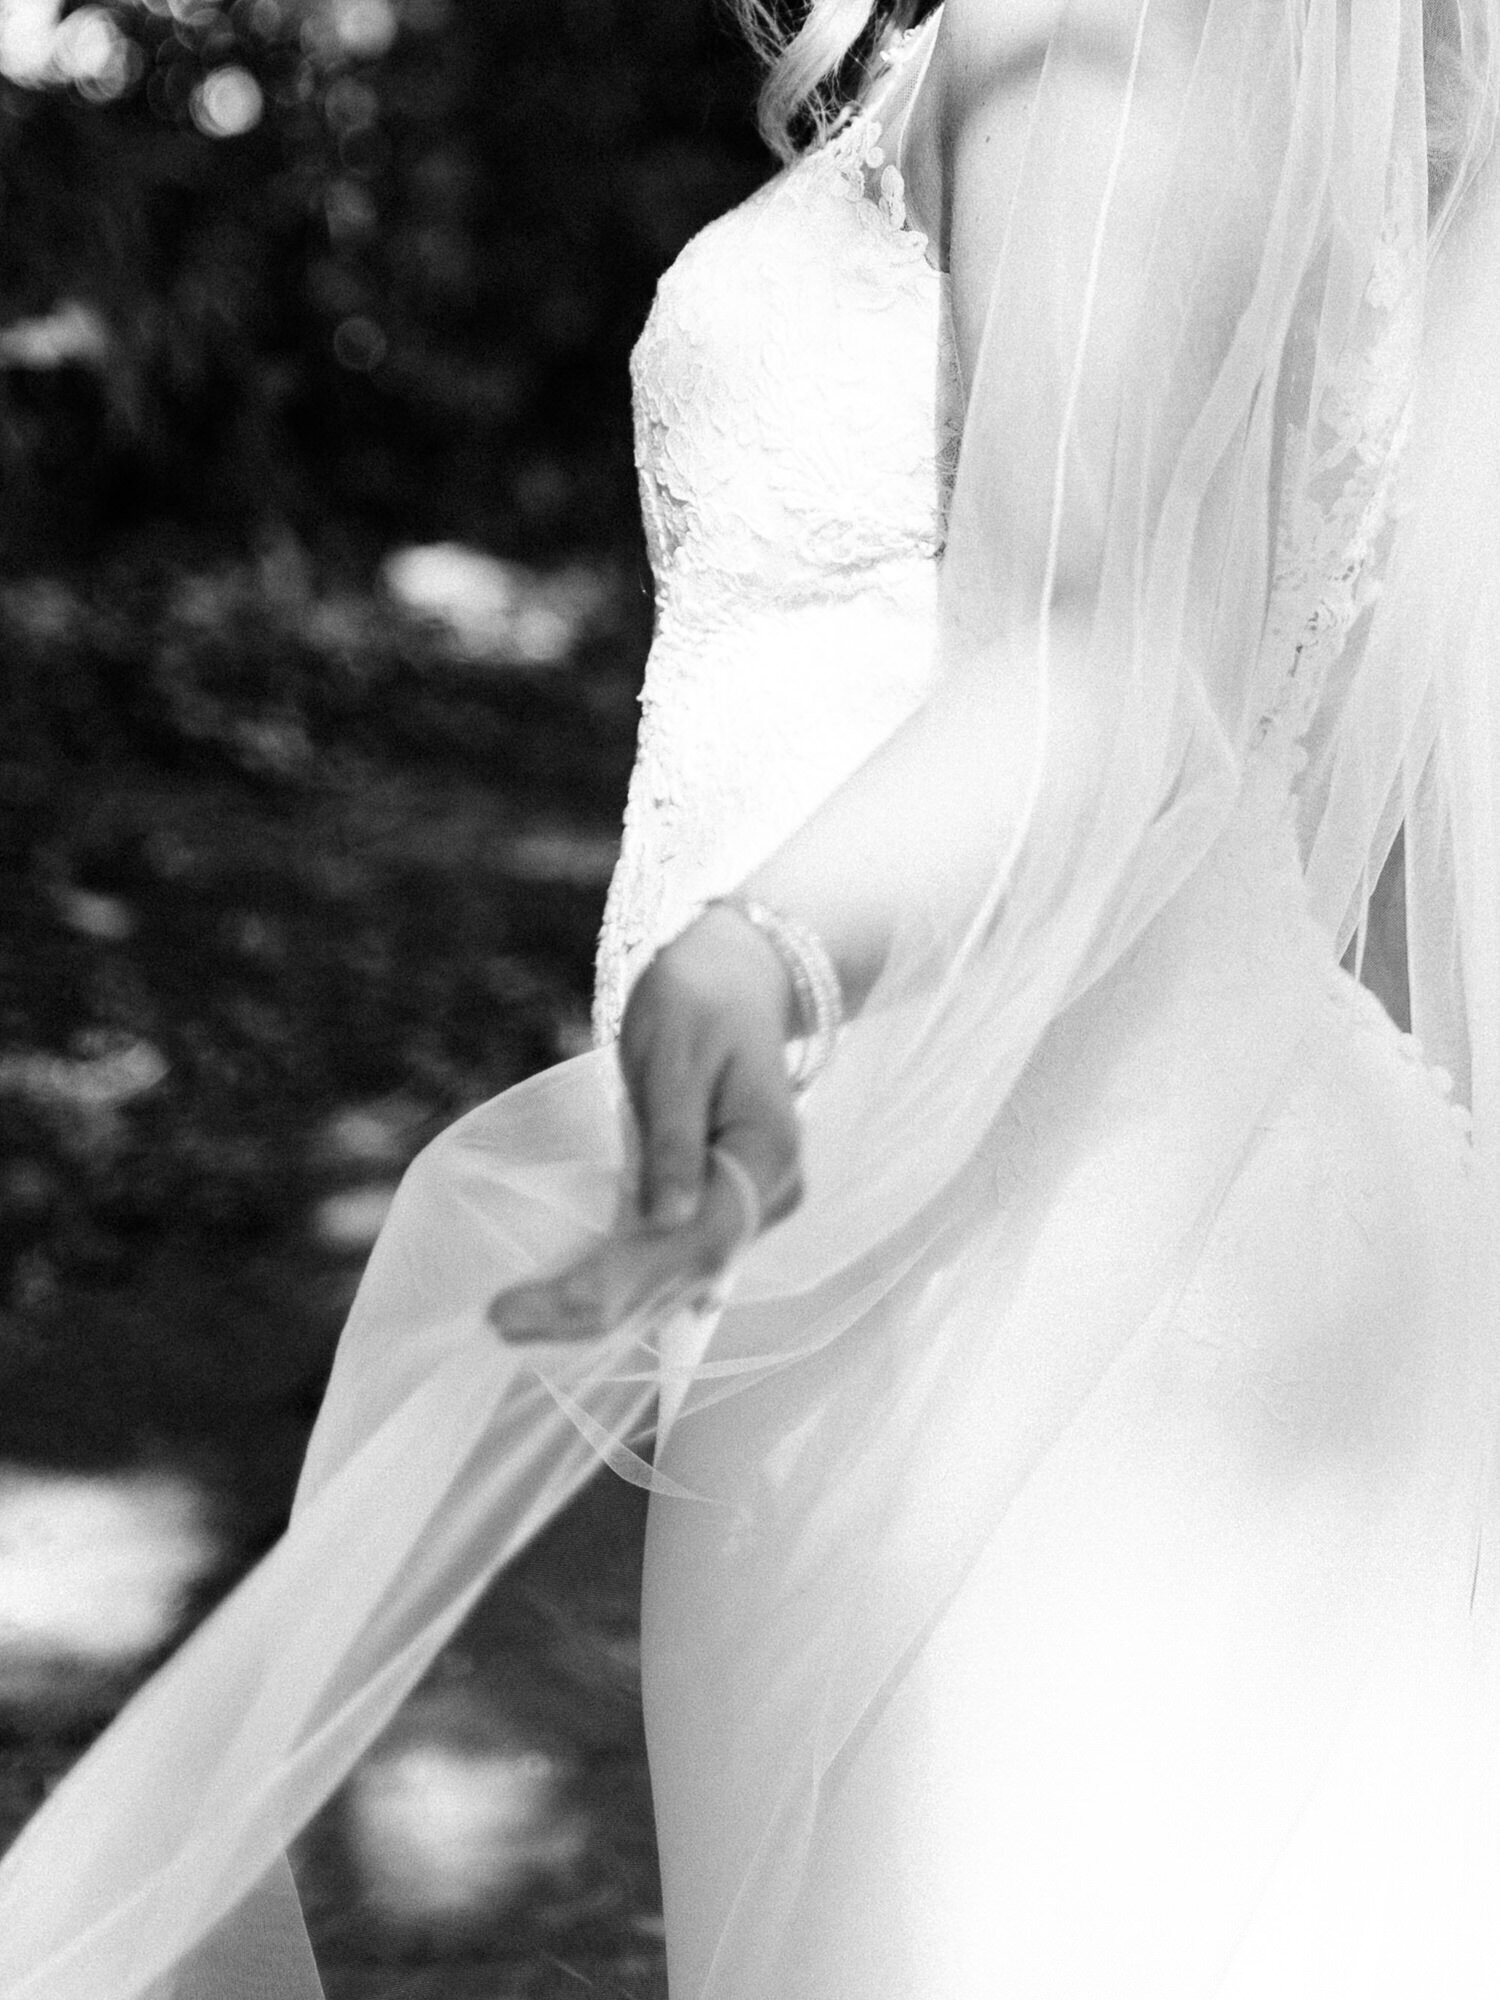 An artistic, film-inspired image taken by Austin wedding photographer KD Captures. A bride is twisting while holding her veil. This image only shows her hand and her veil.